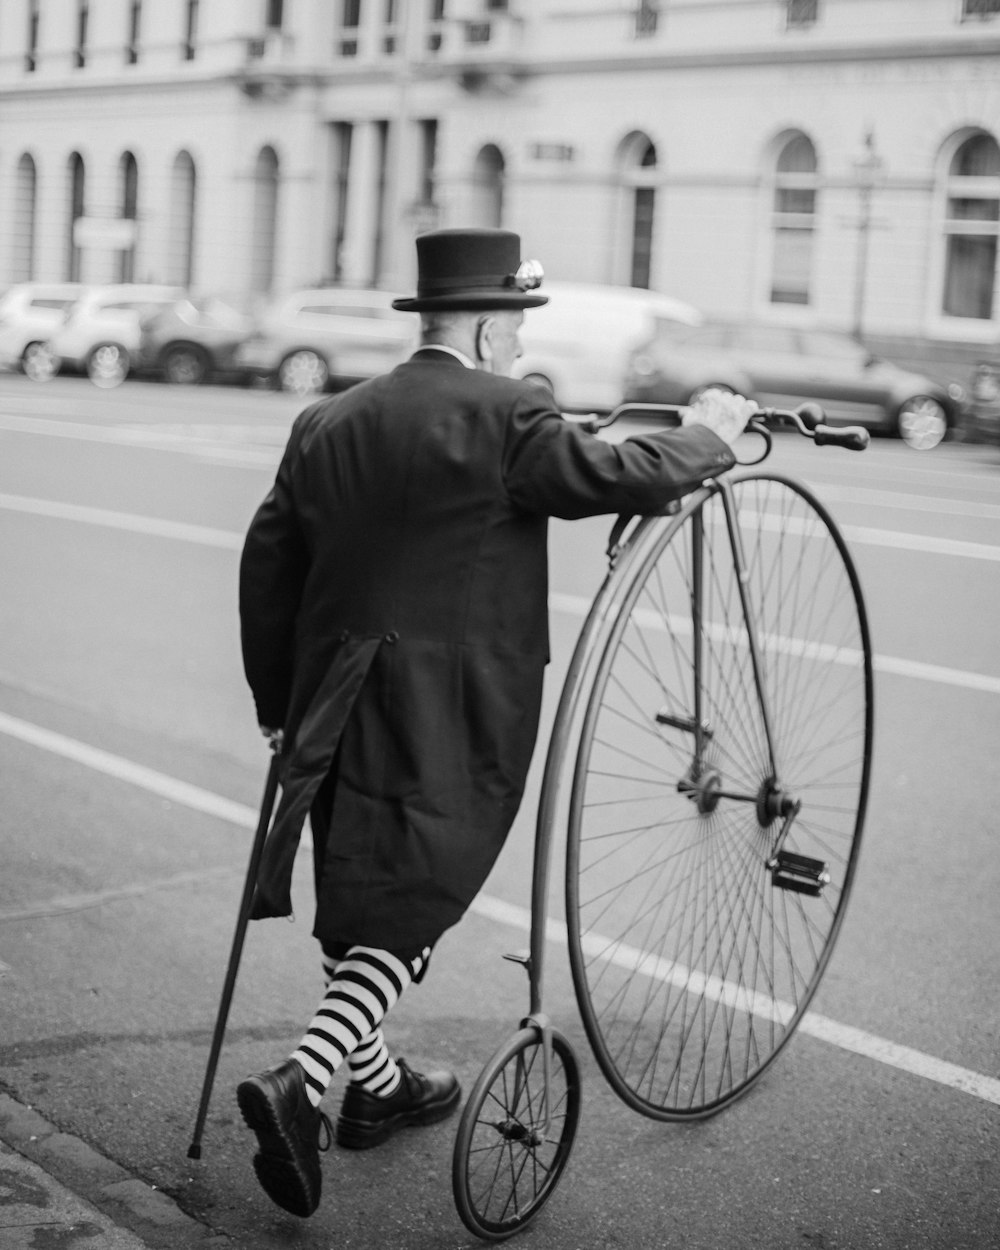 man in black coat and pants riding bicycle on road in grayscale photography